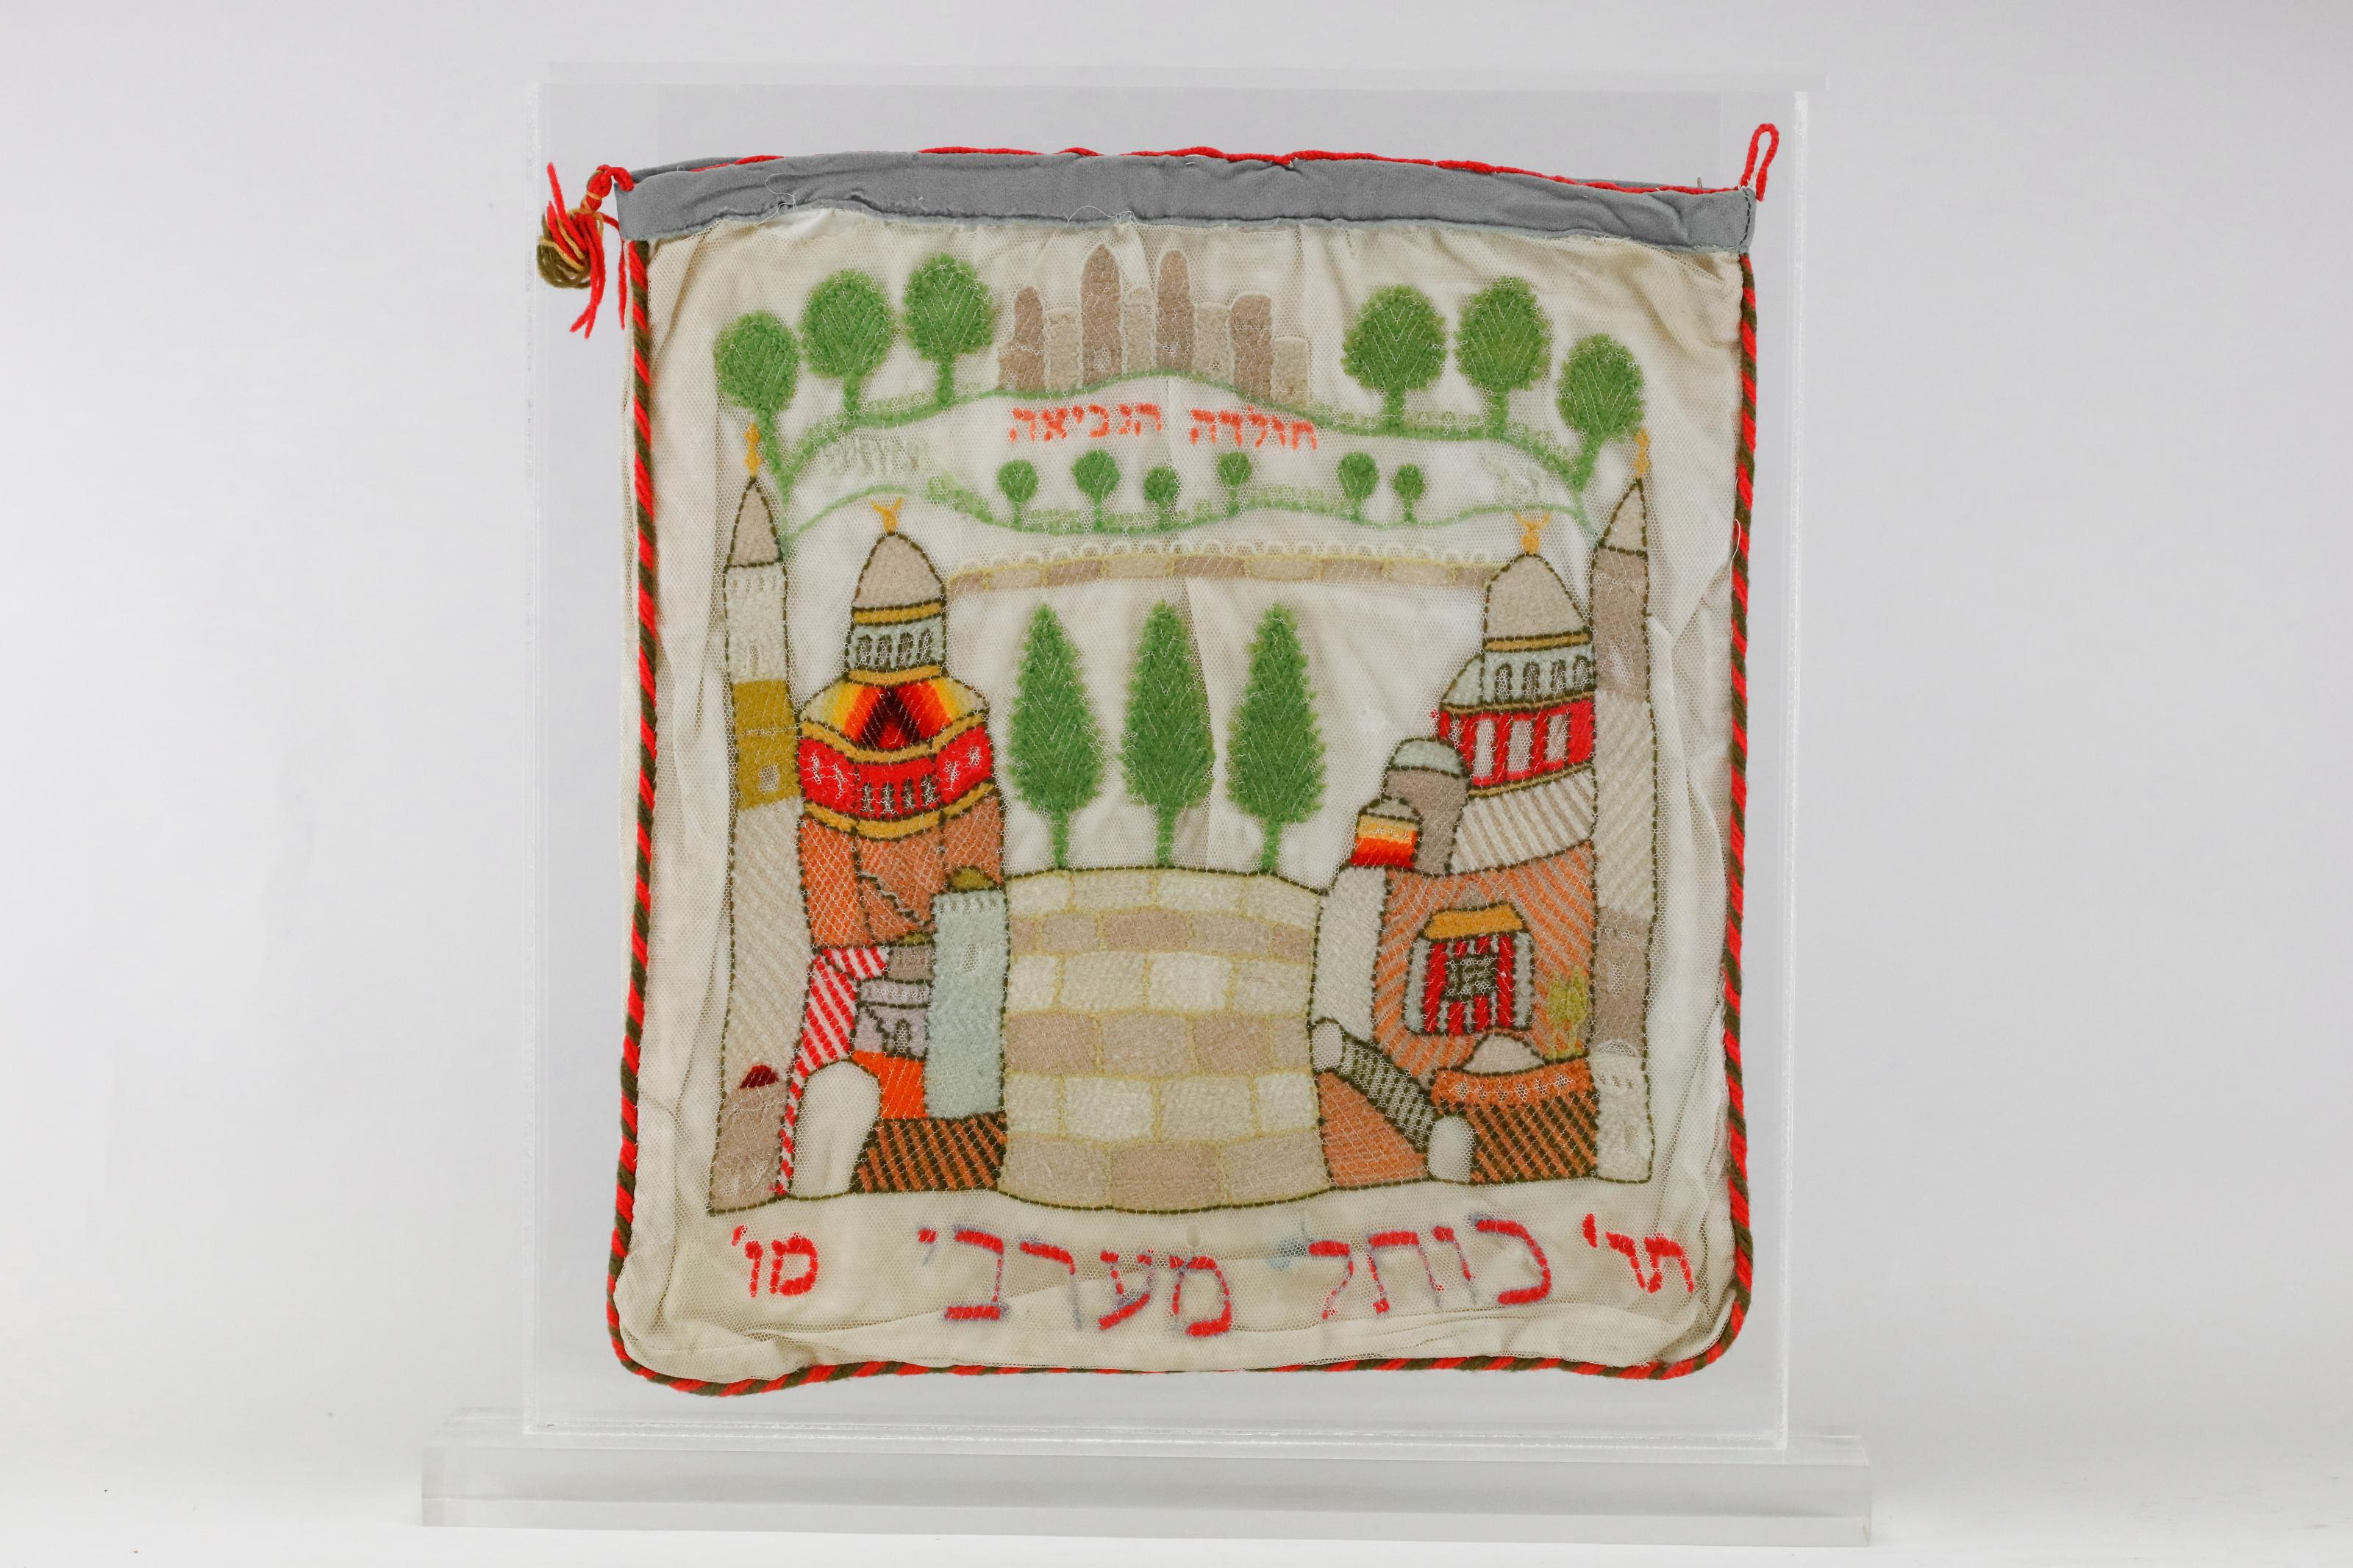 An Intricate Jerusalem Textile, made in Jerusalem, 1886.
Double-sided large pouch. Wool thread embroidered on cotton net. One side has a lion and stag holding flags reading “Jerusalem” in Hebrew, which flank a crowned Ten Commandments. Titled in